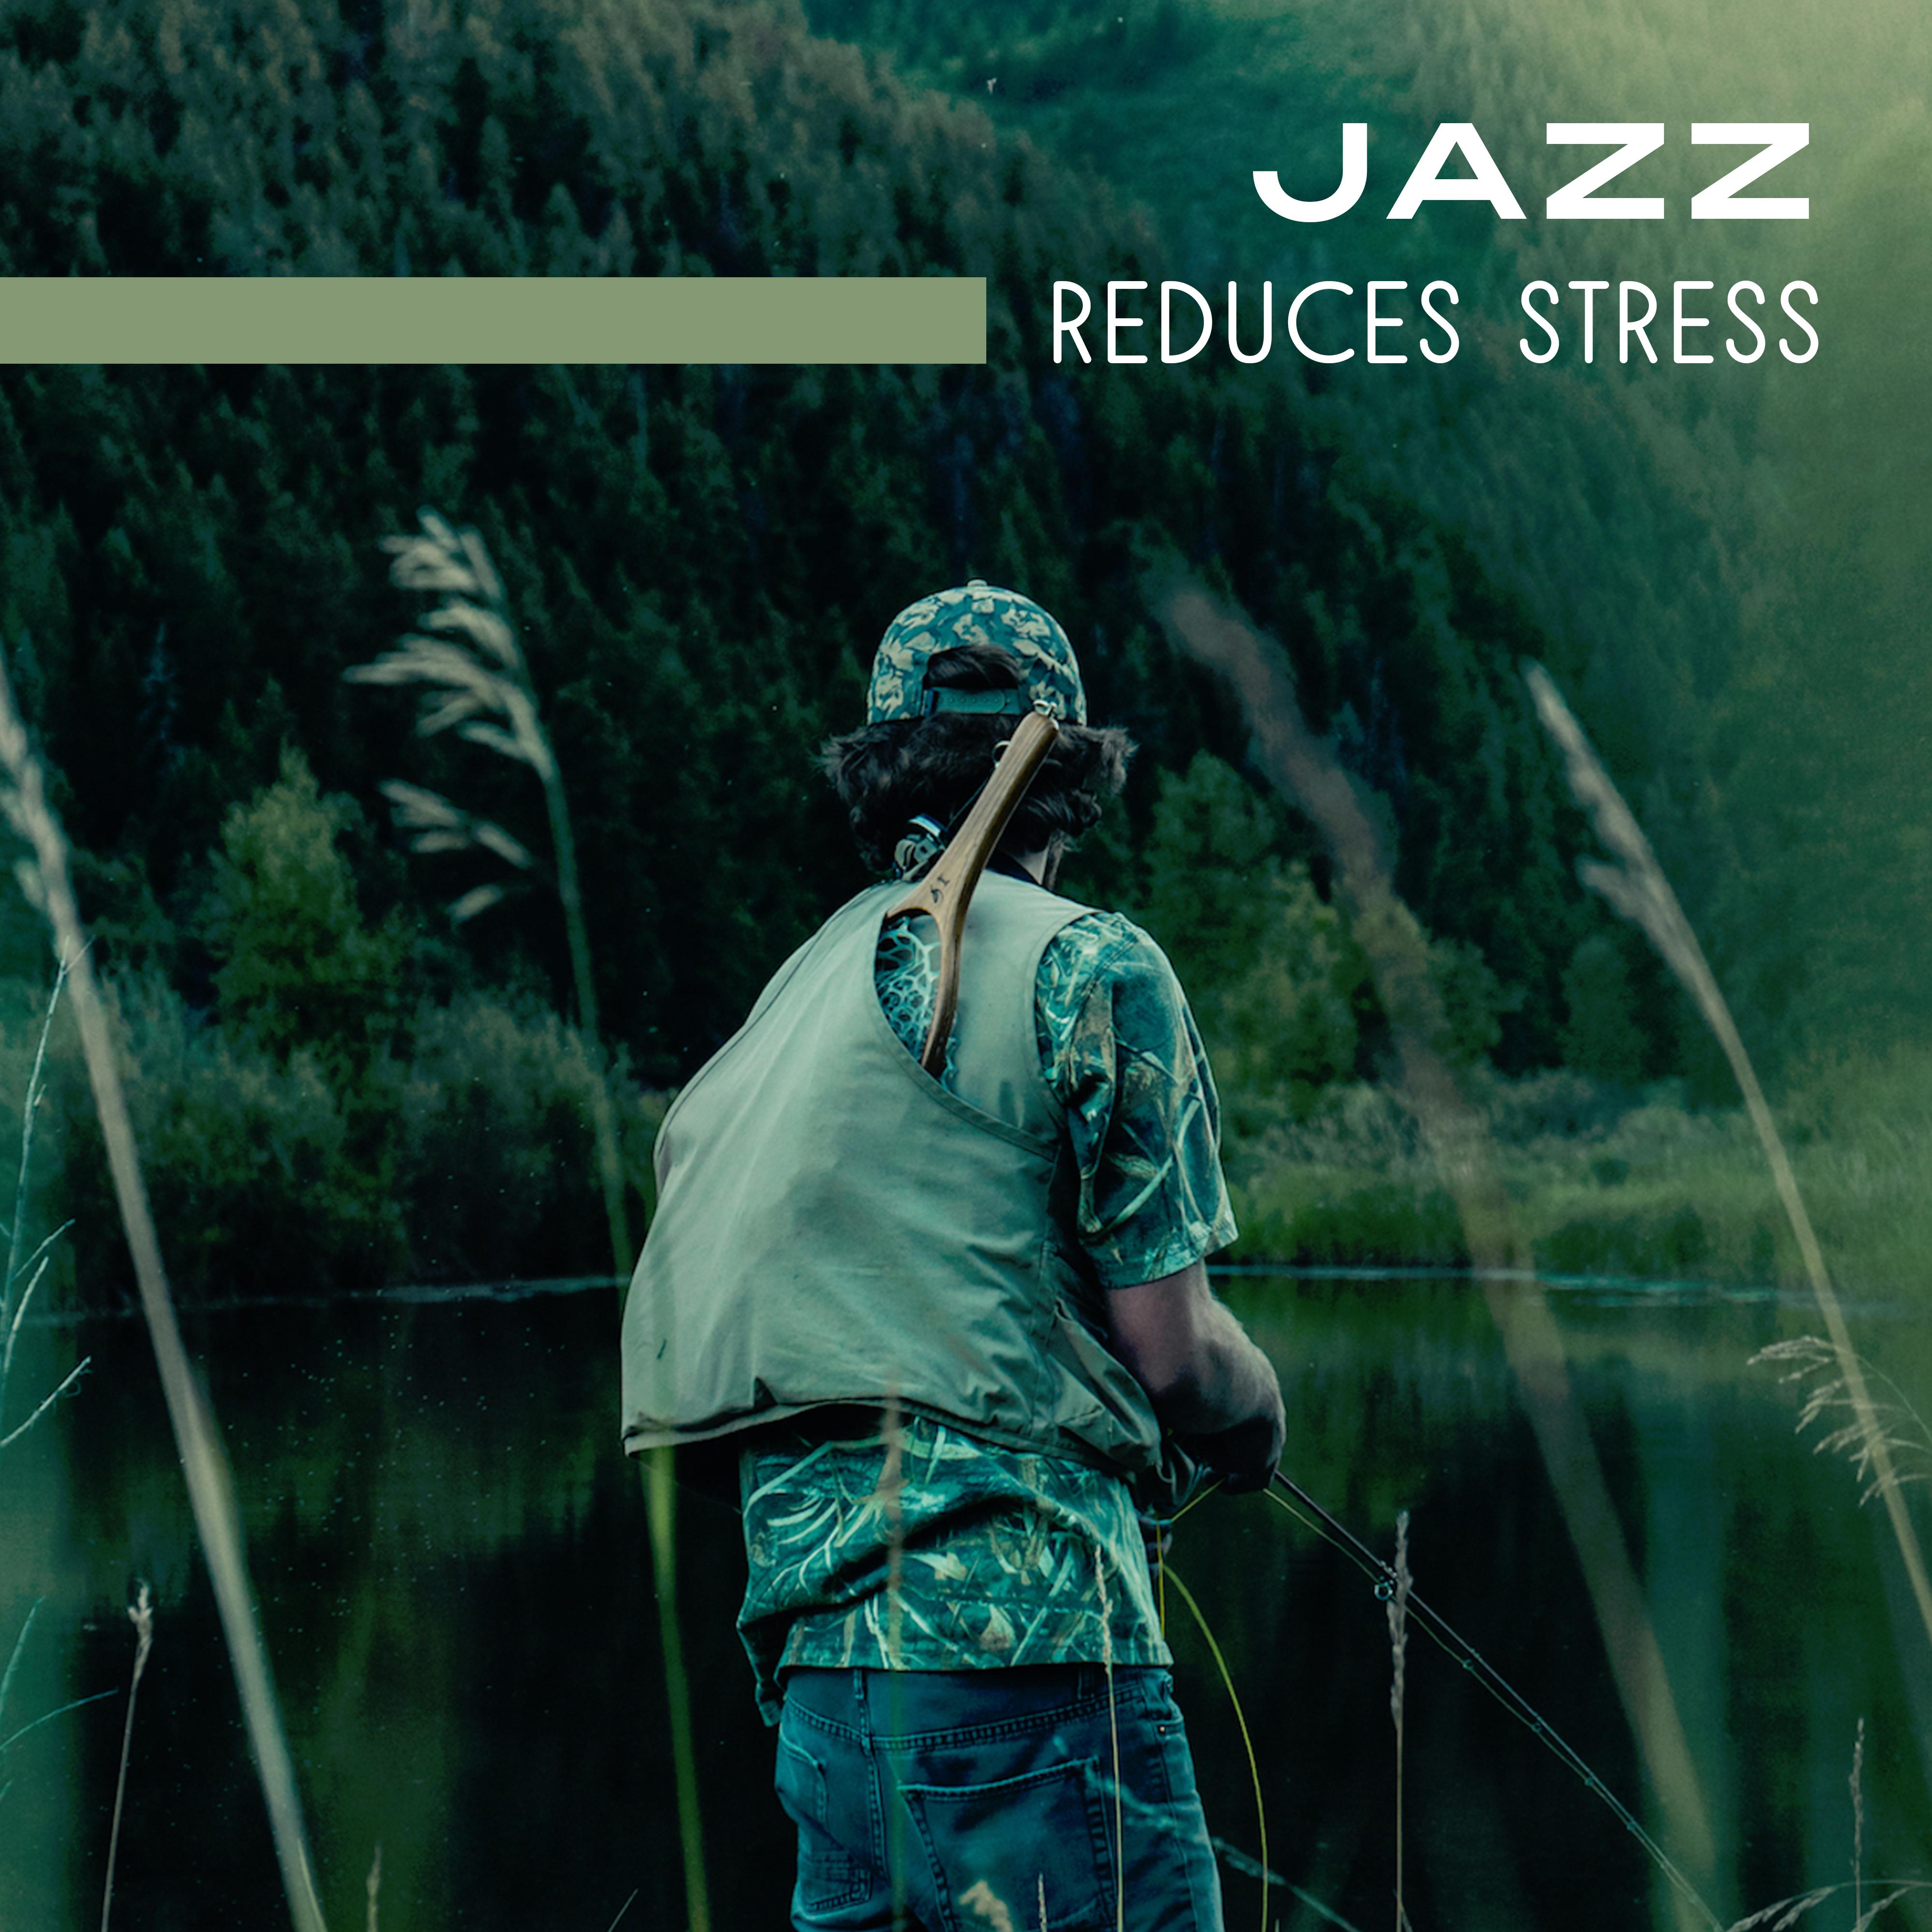 Jazz Reduces Stress – Instrumental Music for Relaxation, Chilled Jazz, Soothing Guitar, Piano Lounge, Pure Jazz, Rest, Anti Stress Sounds